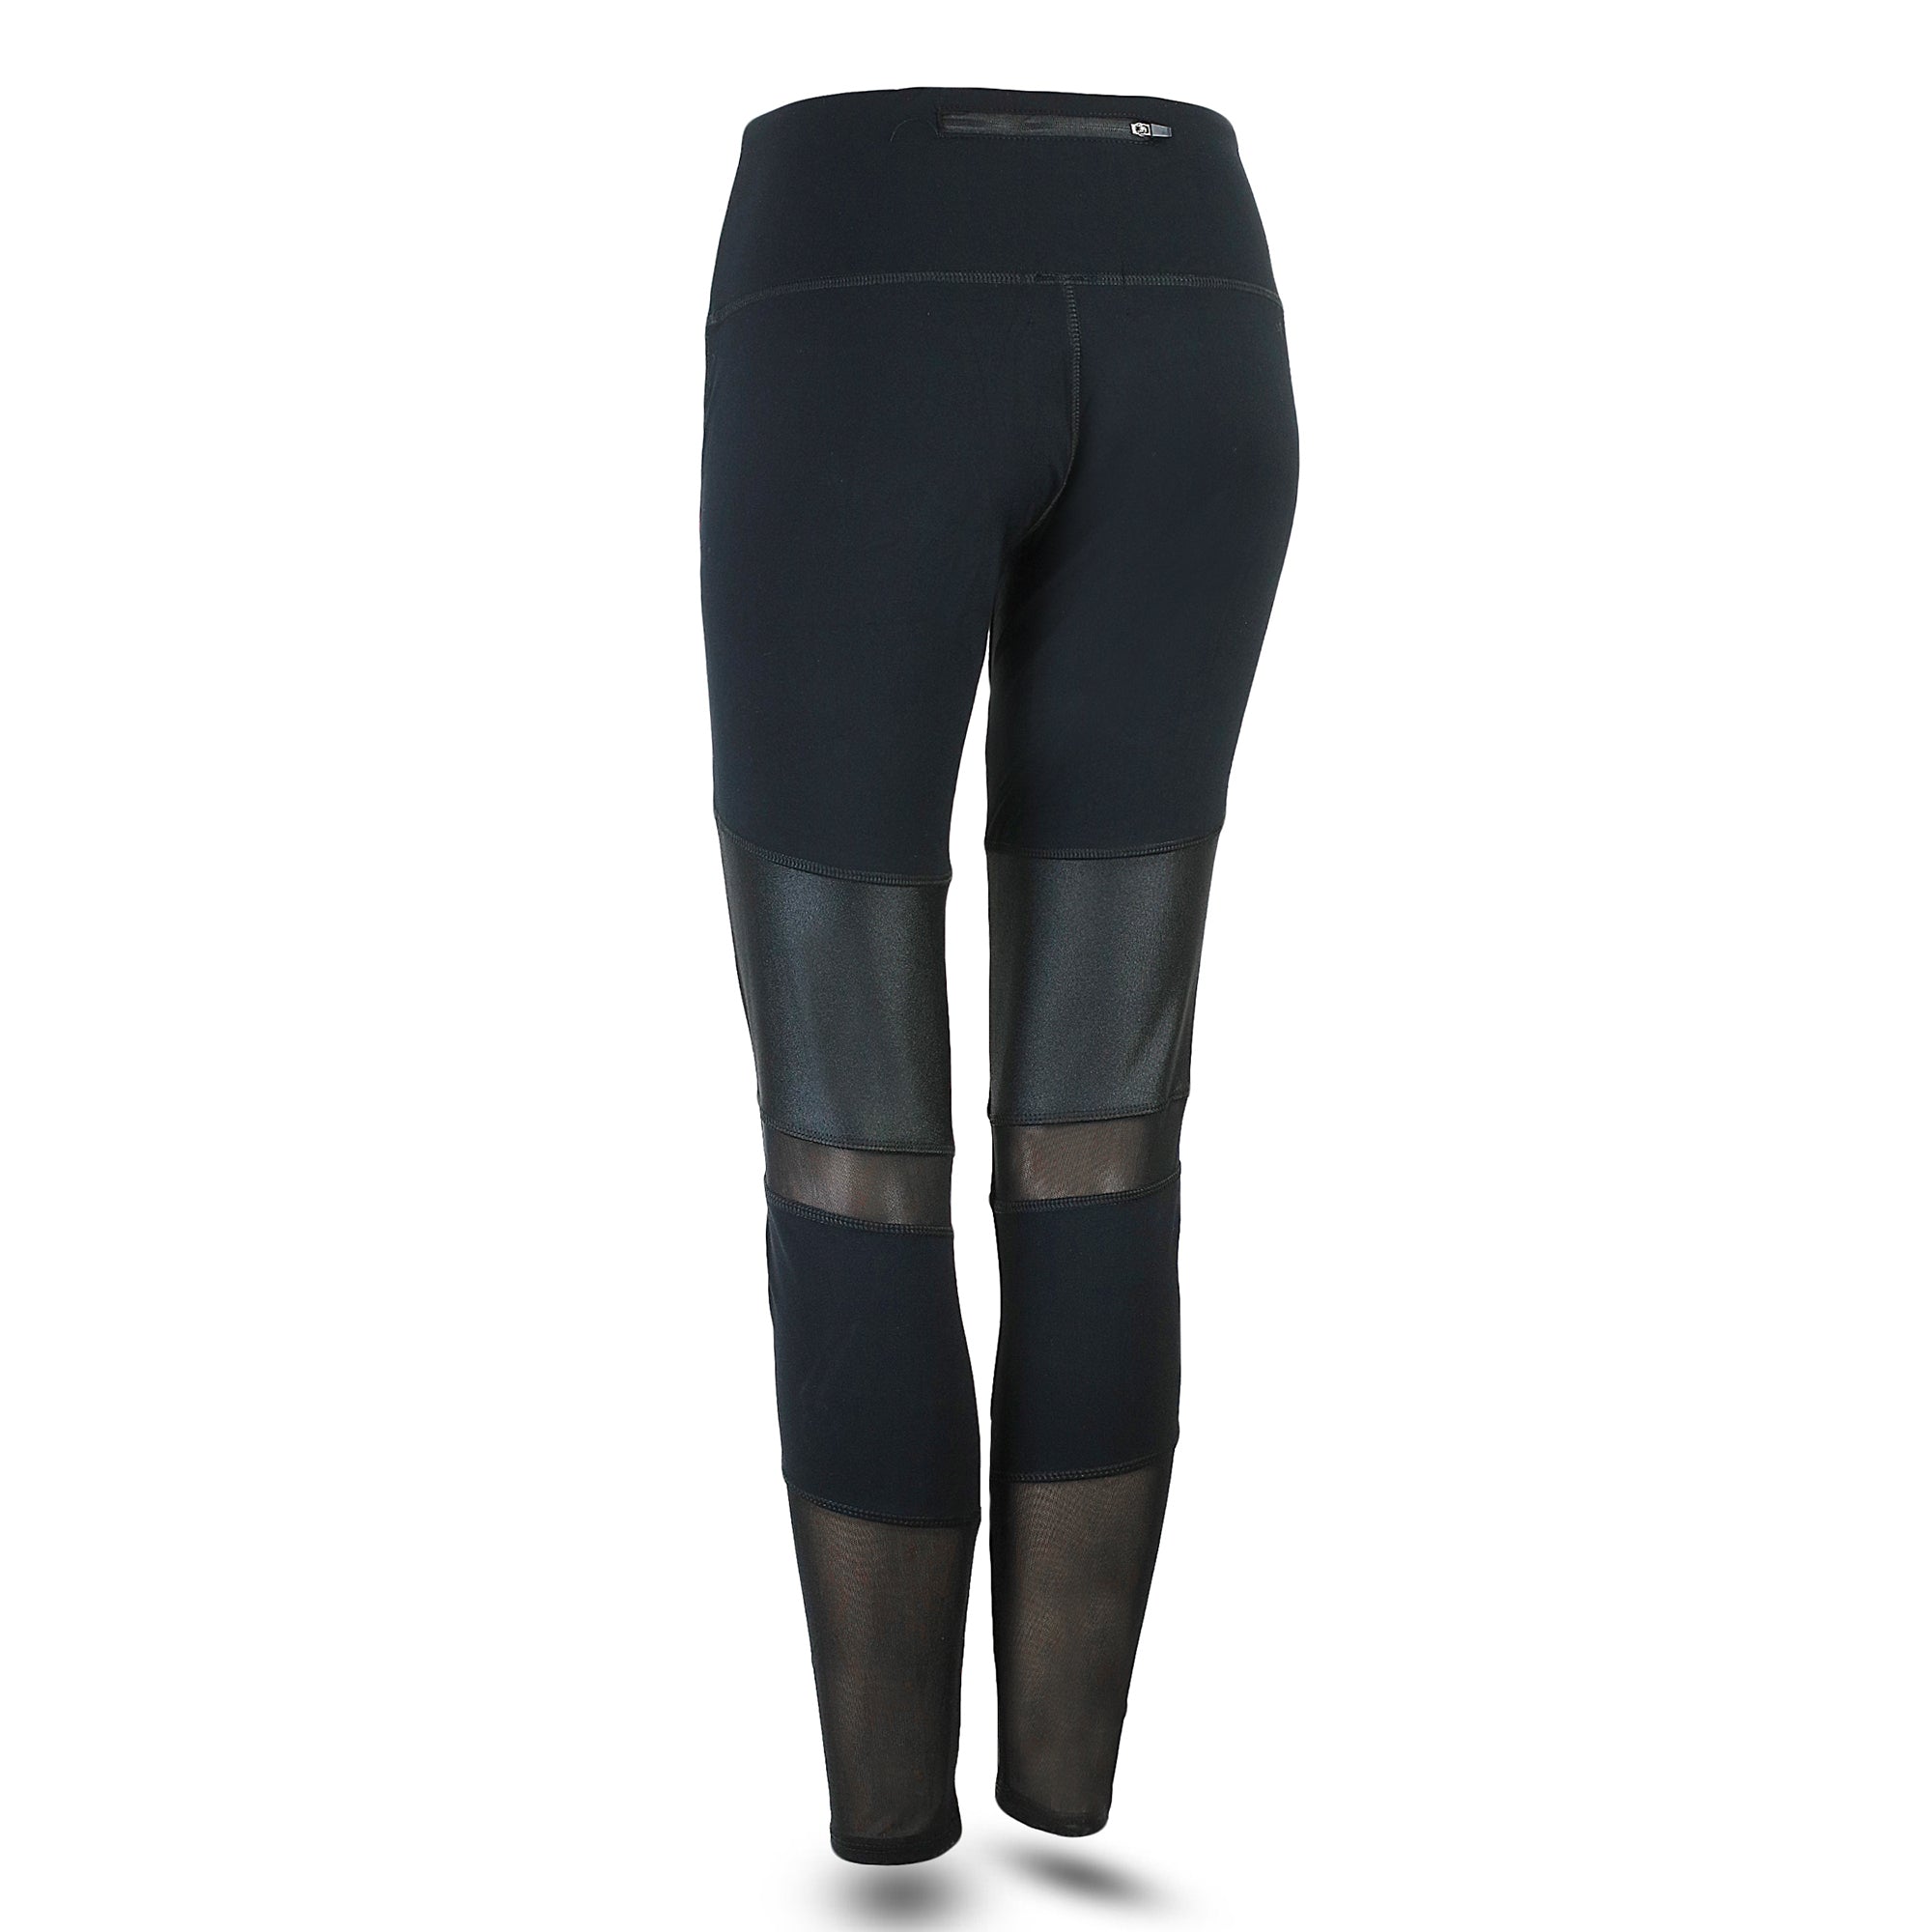 ***ELITE COLLECTION*** ON-TREND BLACK LEGGINGS - WITH LEATHER-LOOK AND MESH INSERTS